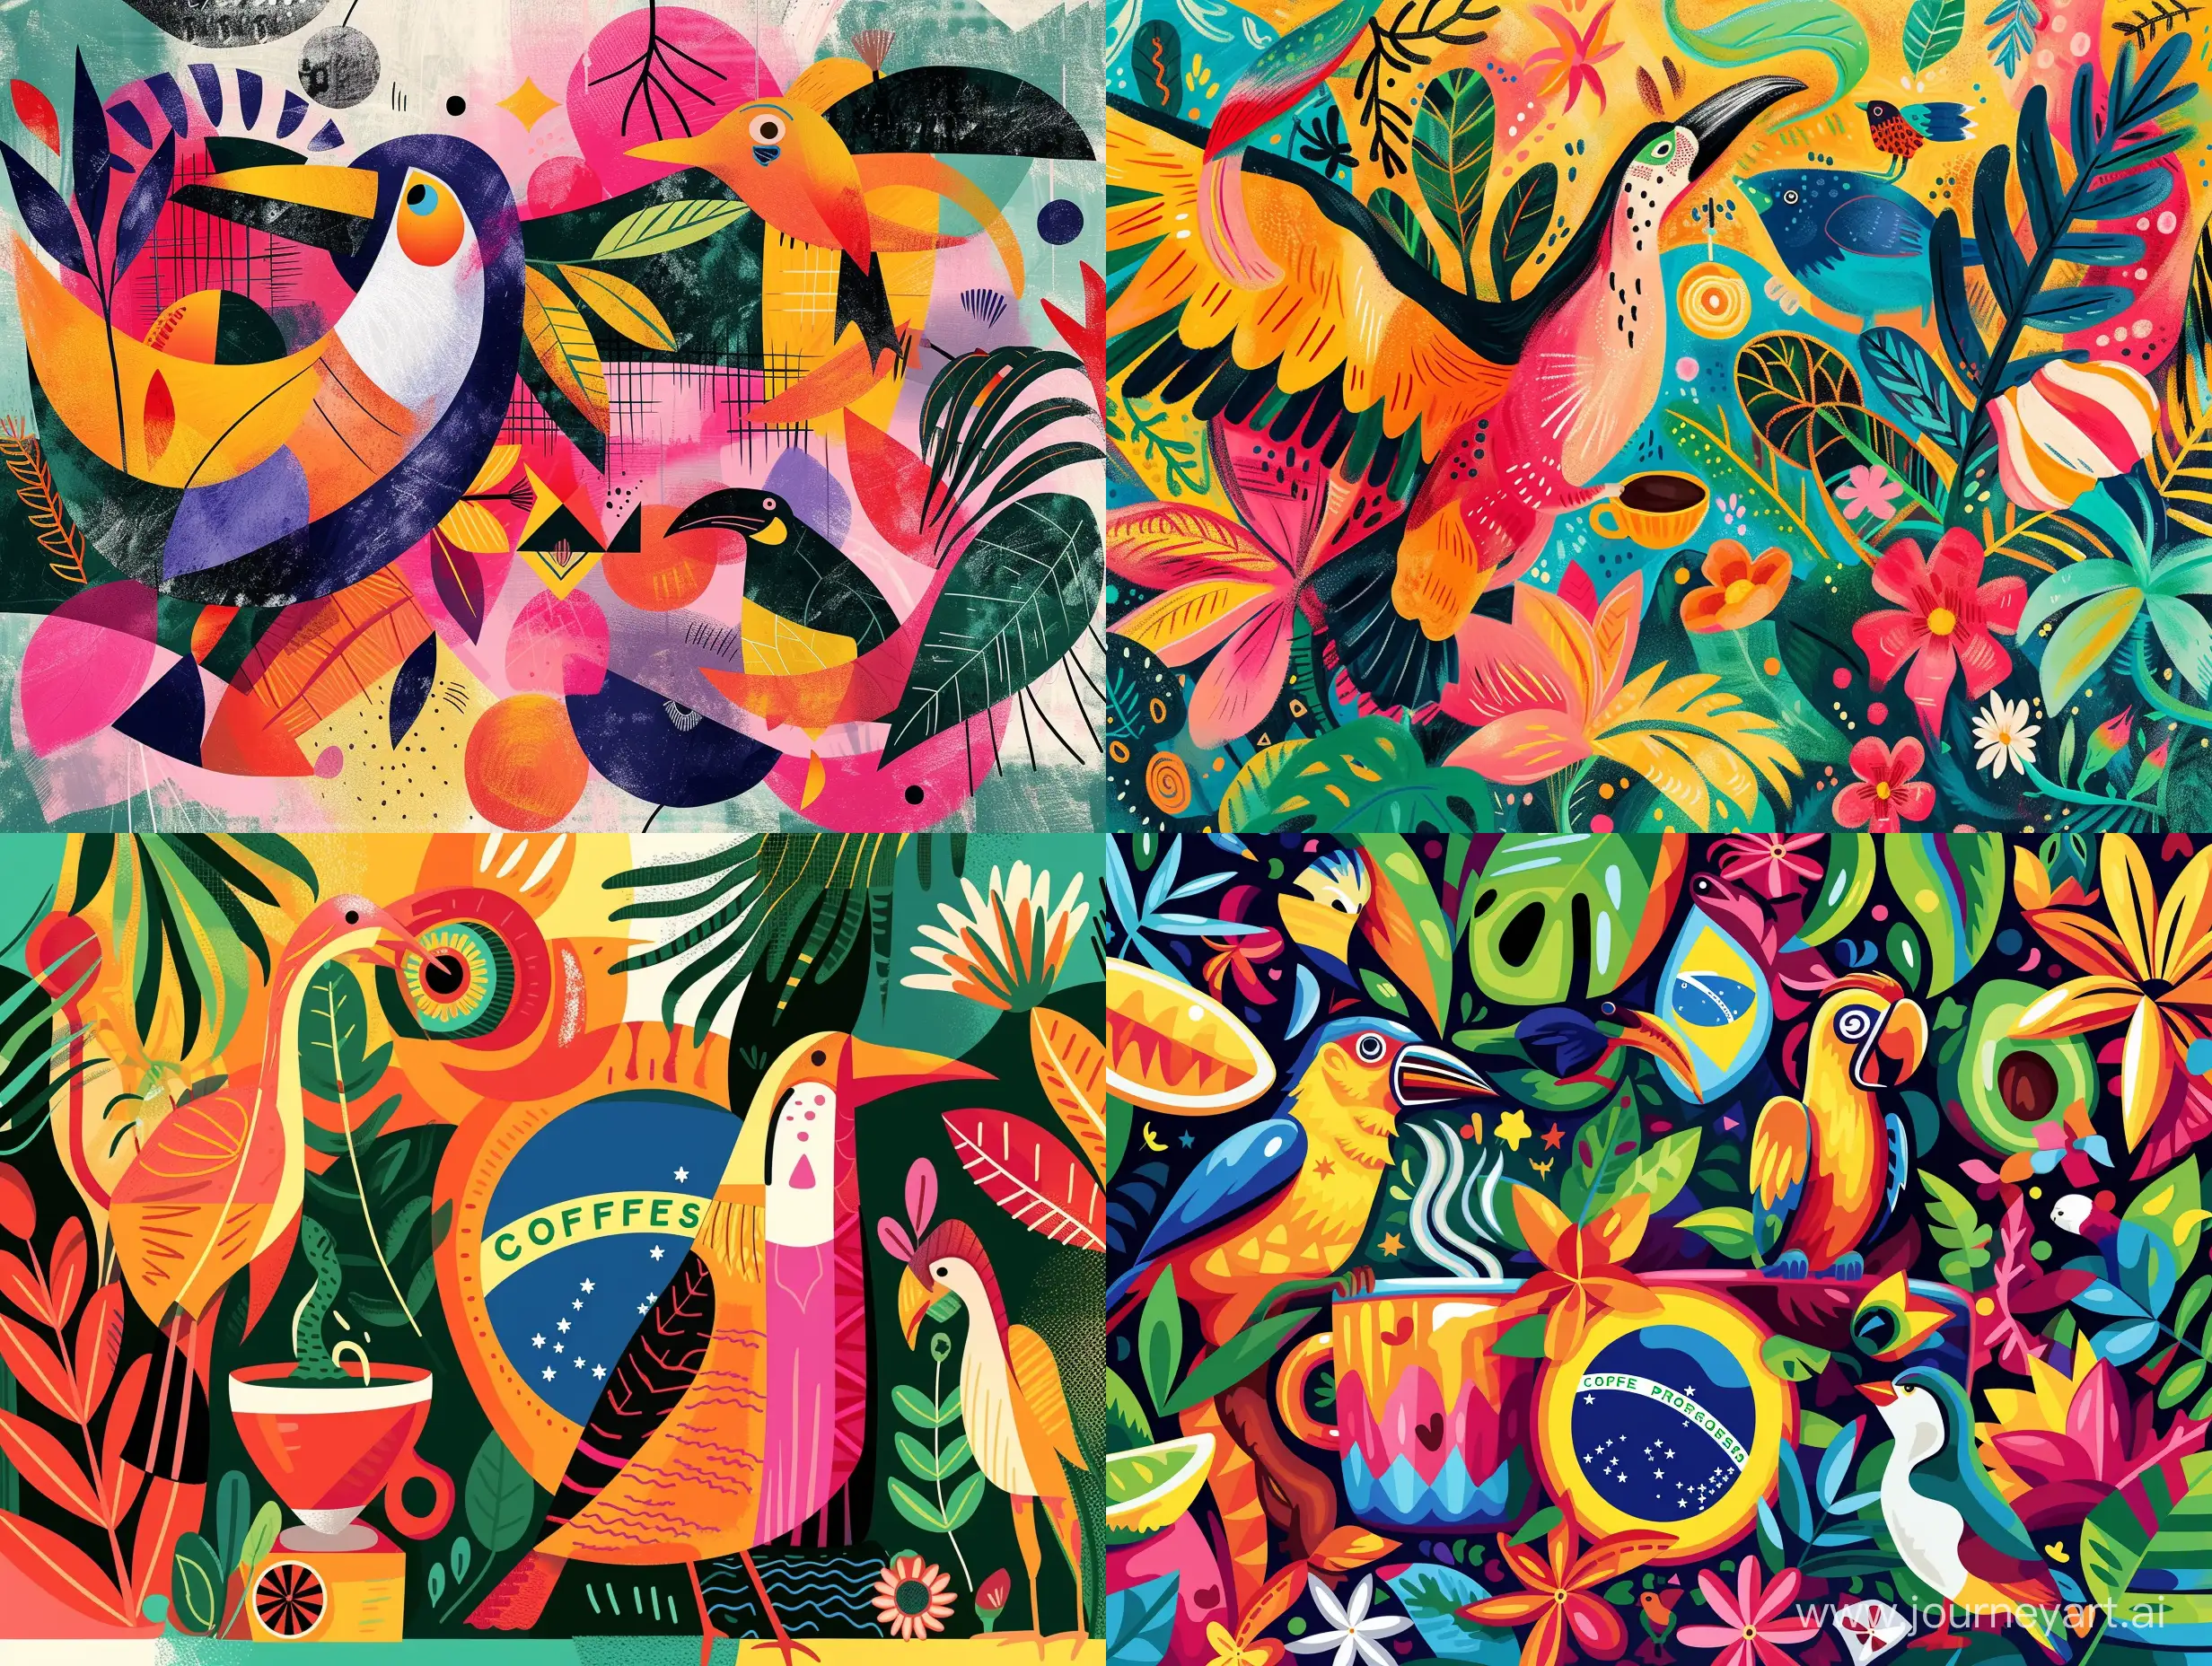 Vibrant-Brazilian-Coffee-Culture-Modern-Abstract-Illustration-with-Wildlife